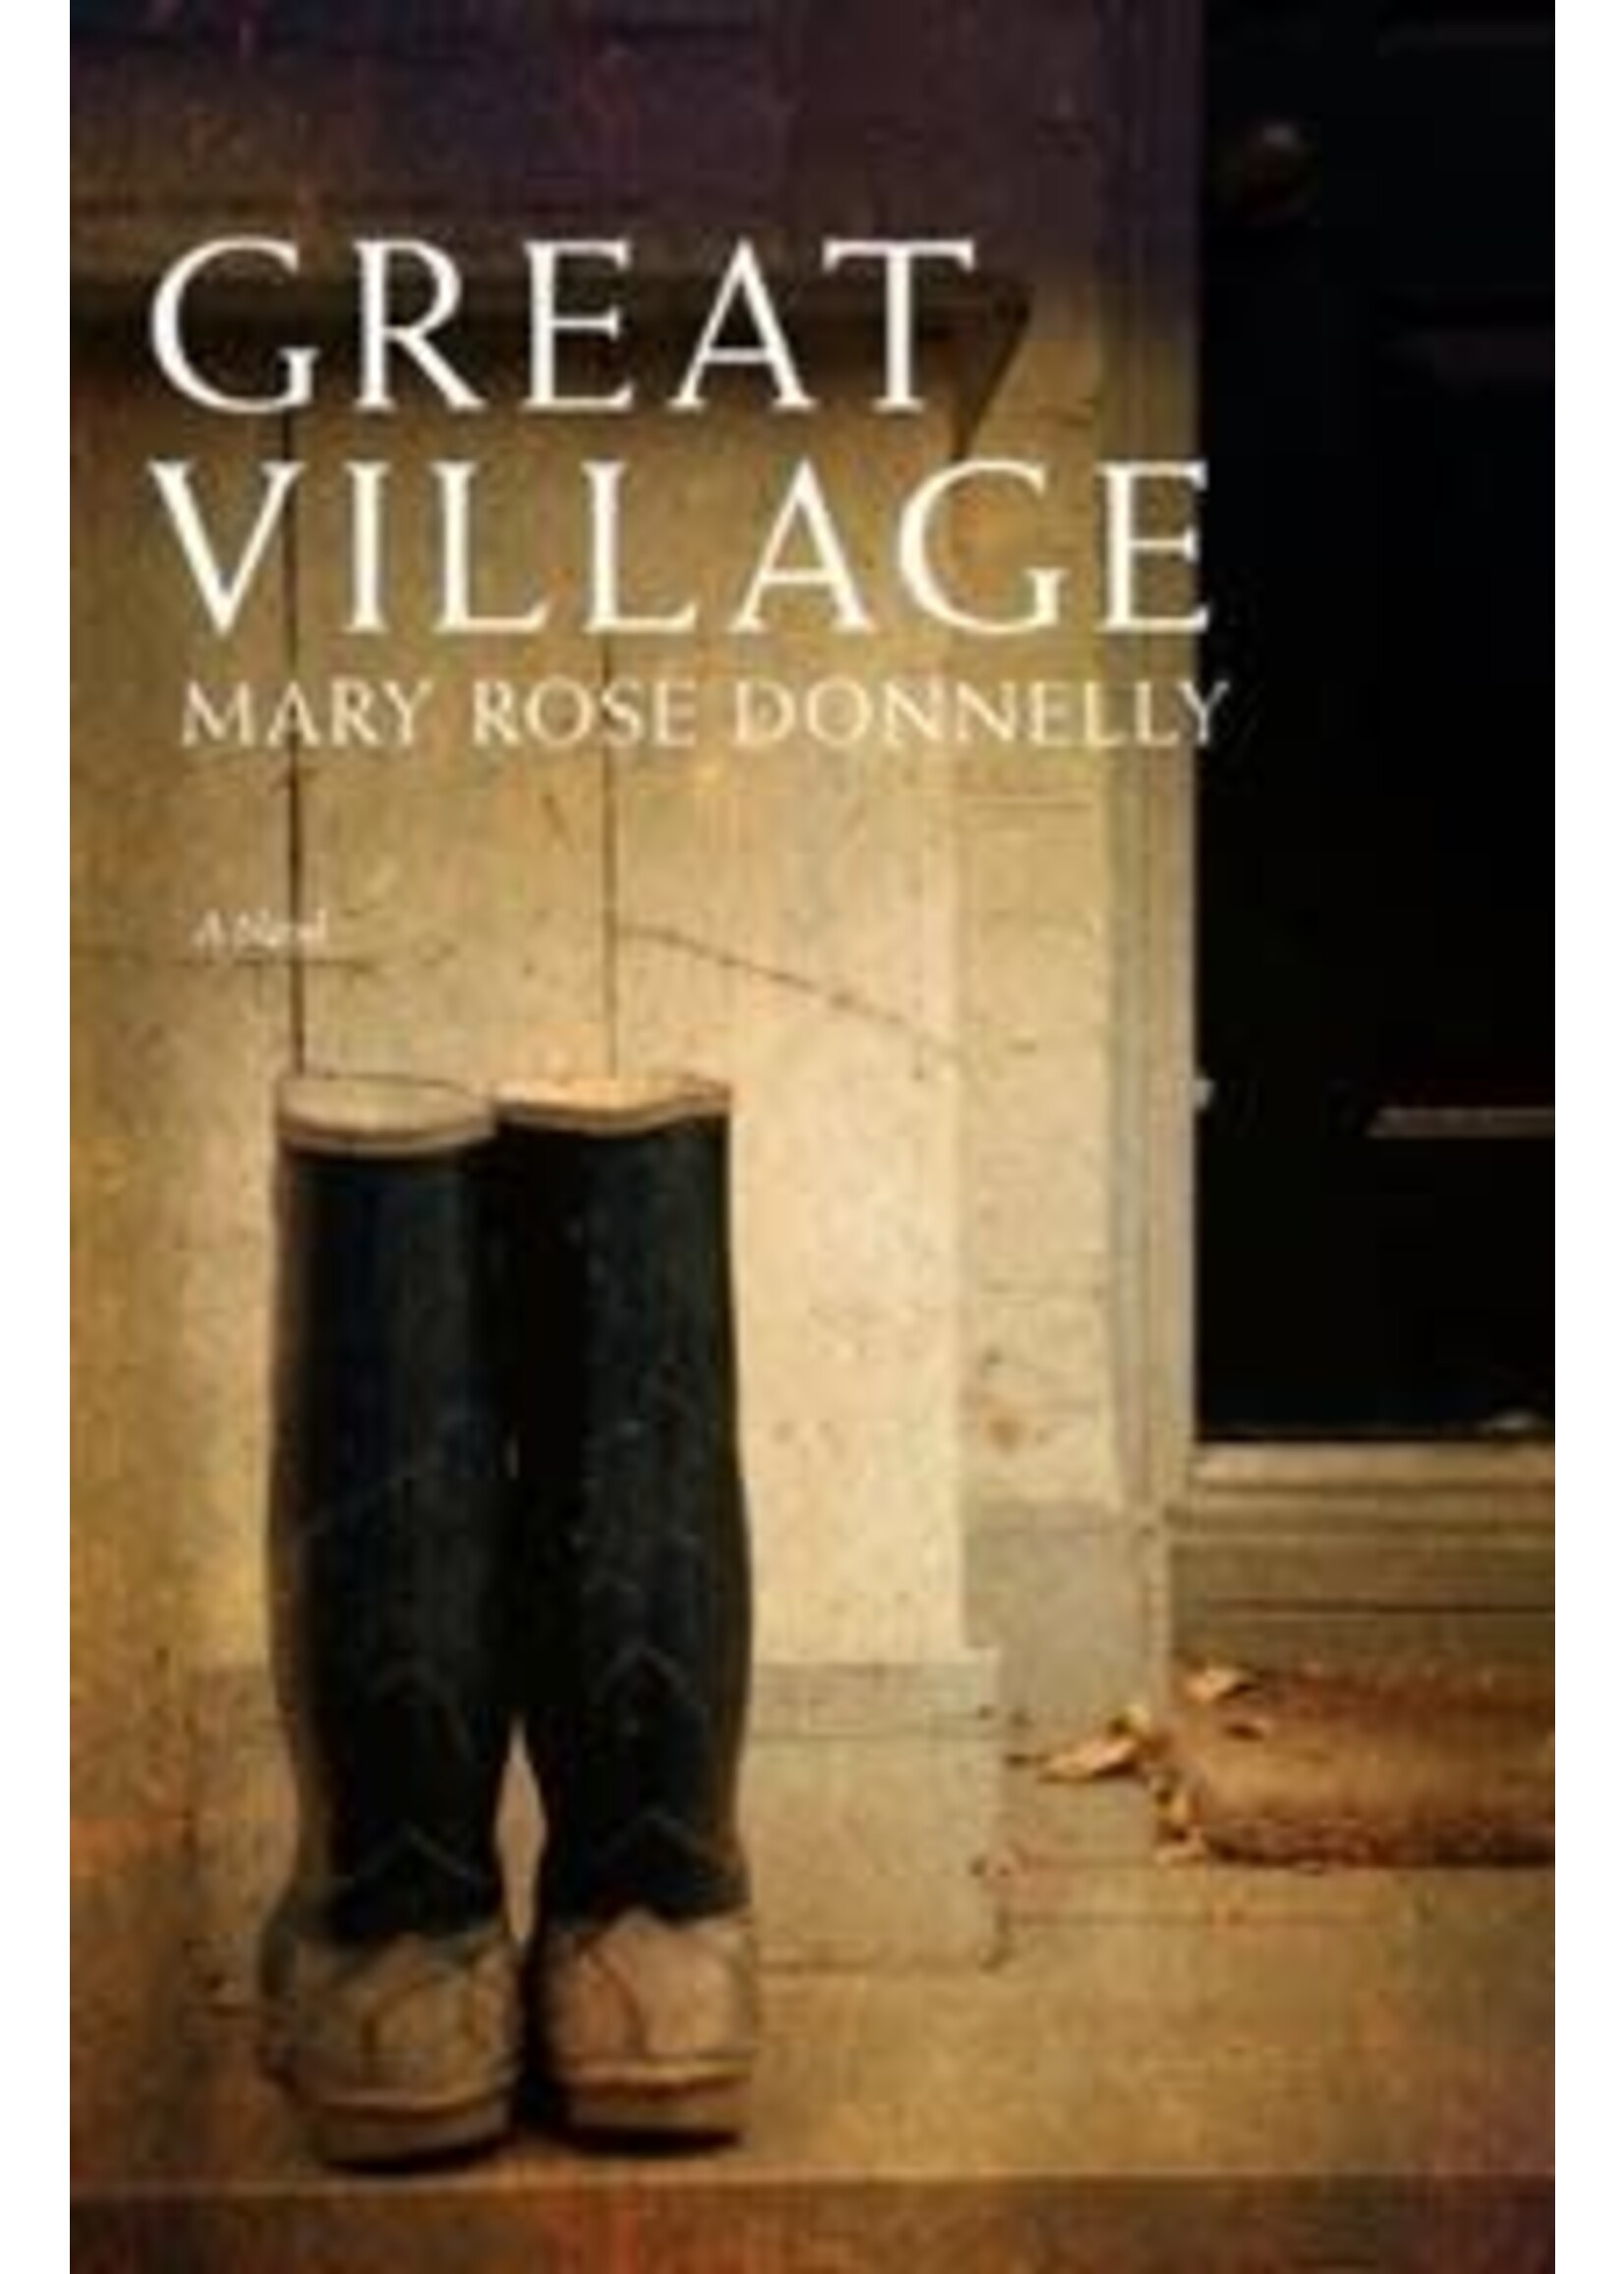 Great Village by Mary Rose Donnelly